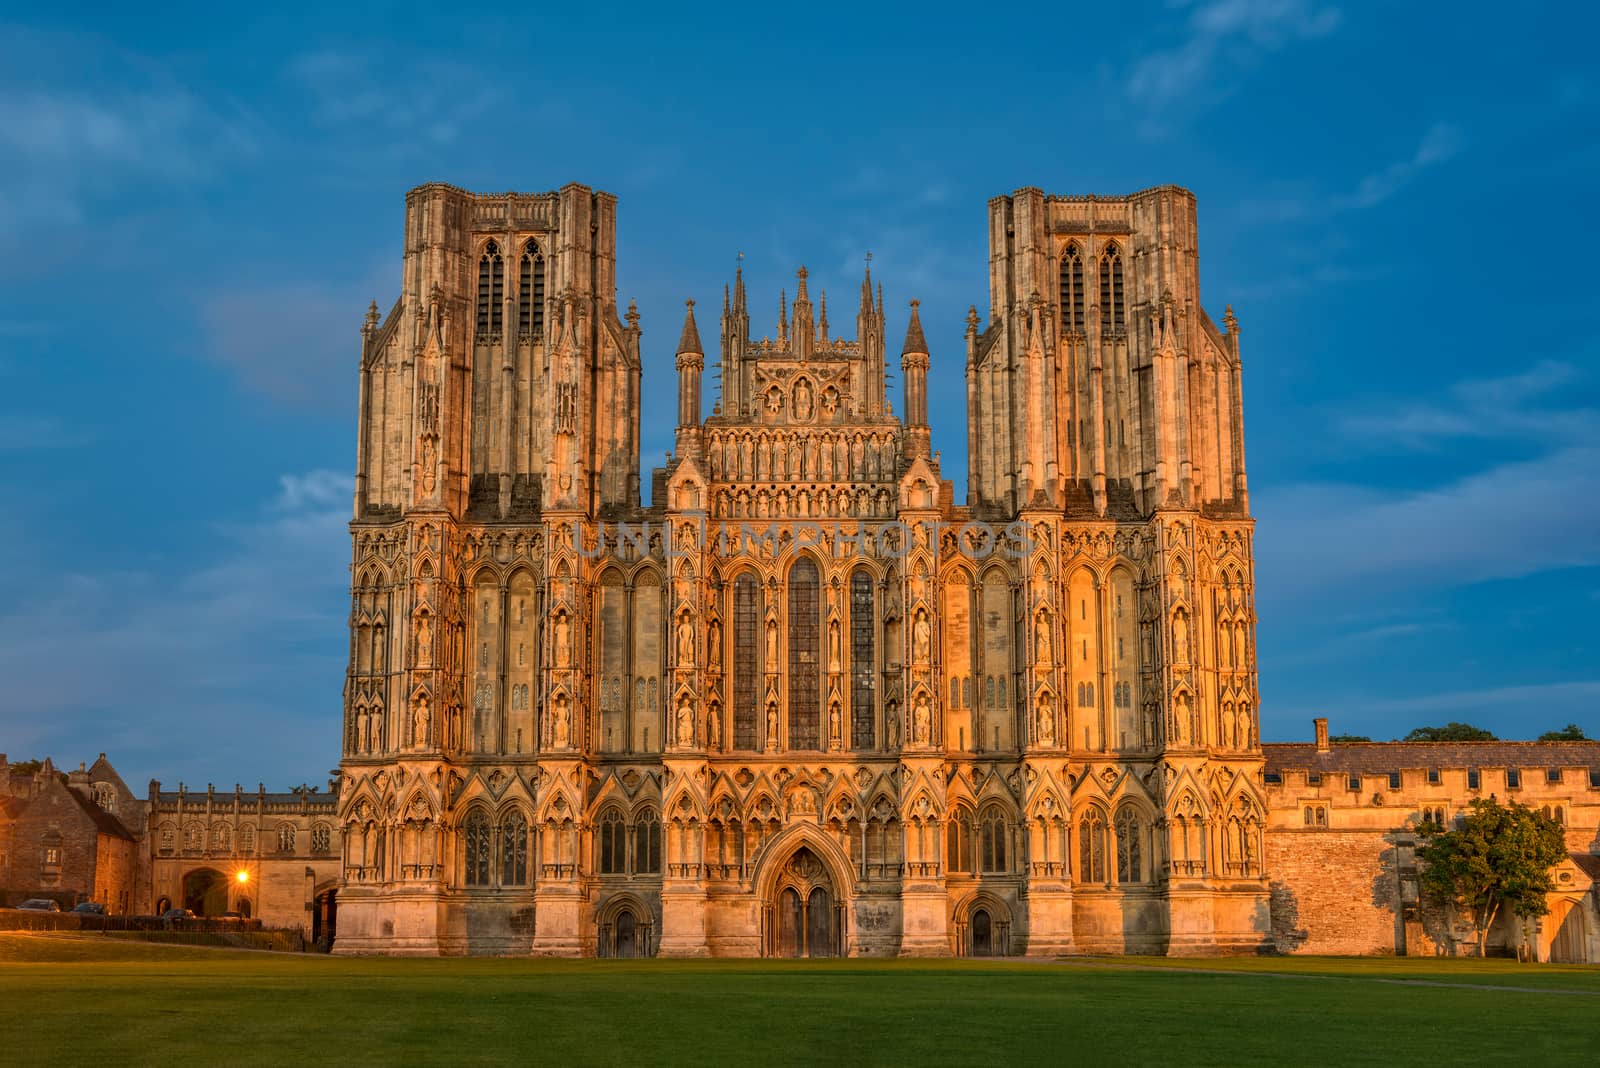 West front of Cathedral Church of Saint Andrew at night. The Wells Cathedral was built between 1175 and 1490.